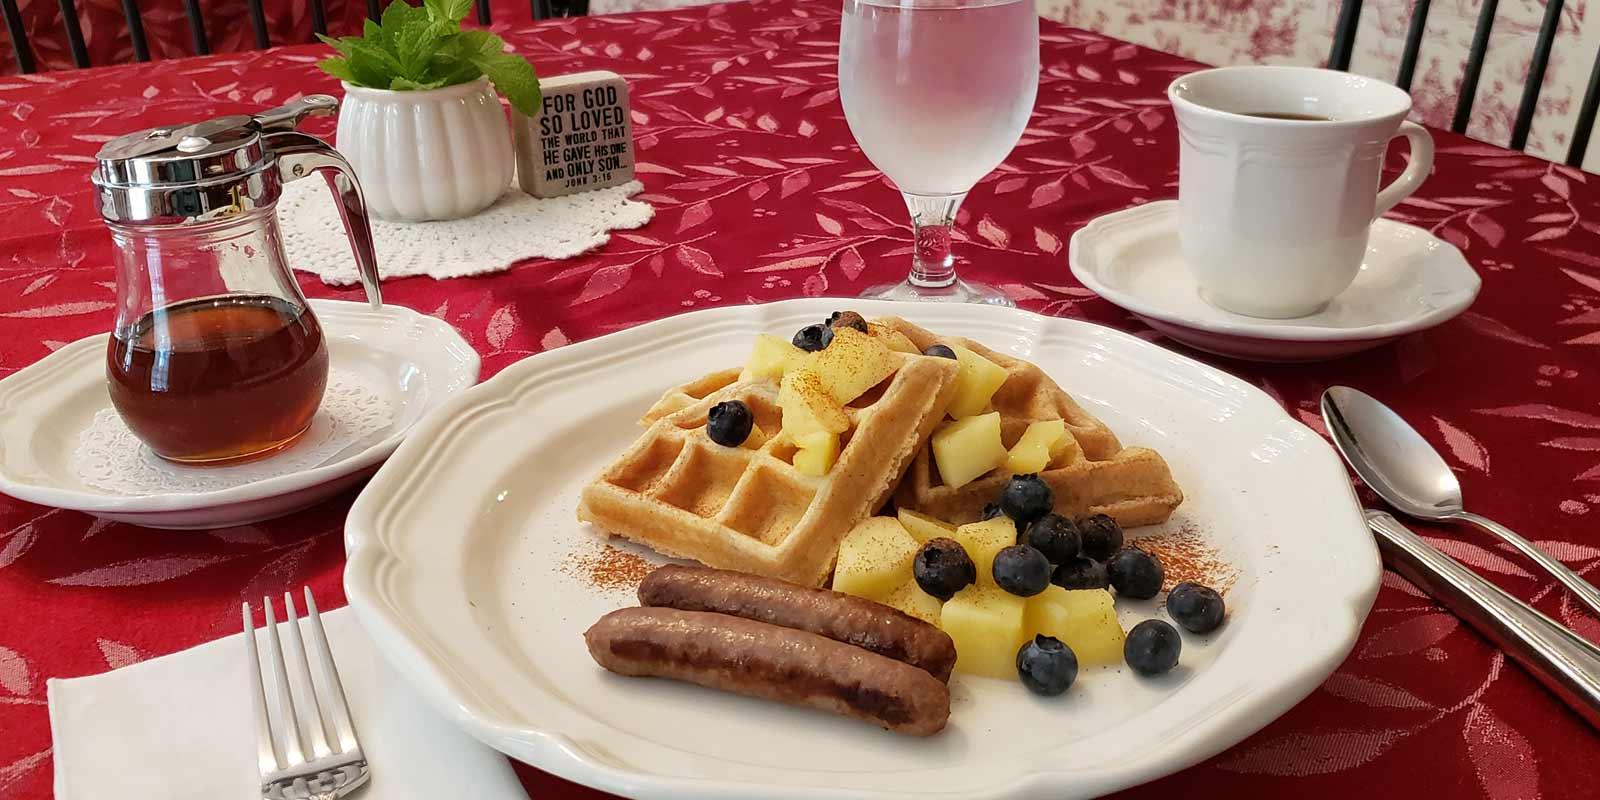 Waffles and fruit